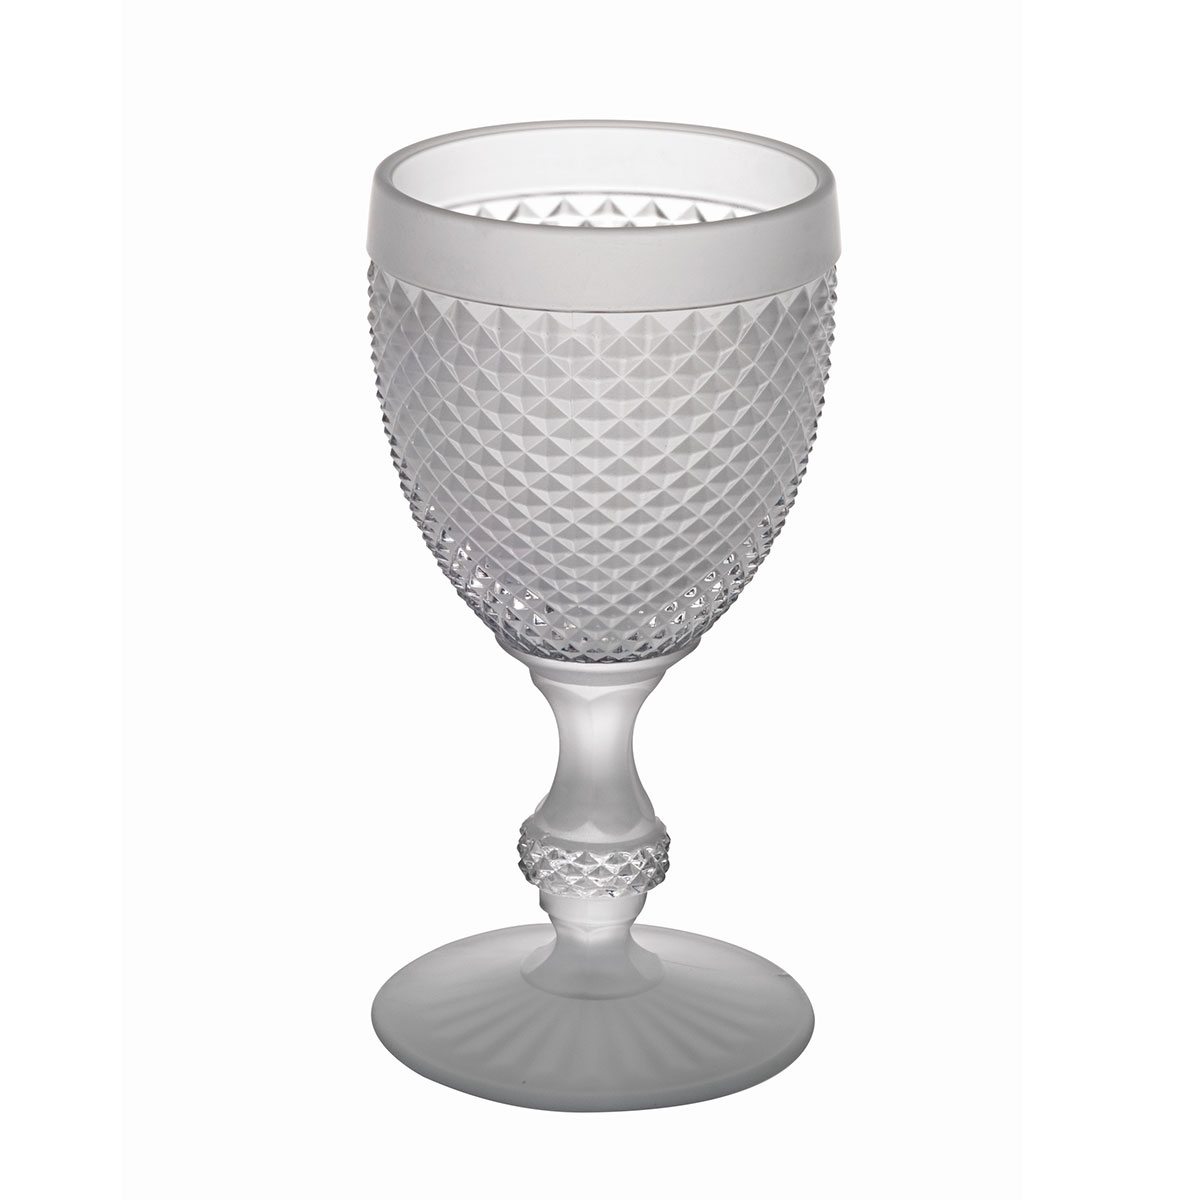 Vista Alegre Glass Bicos Frosted White Goblet, Set of 4